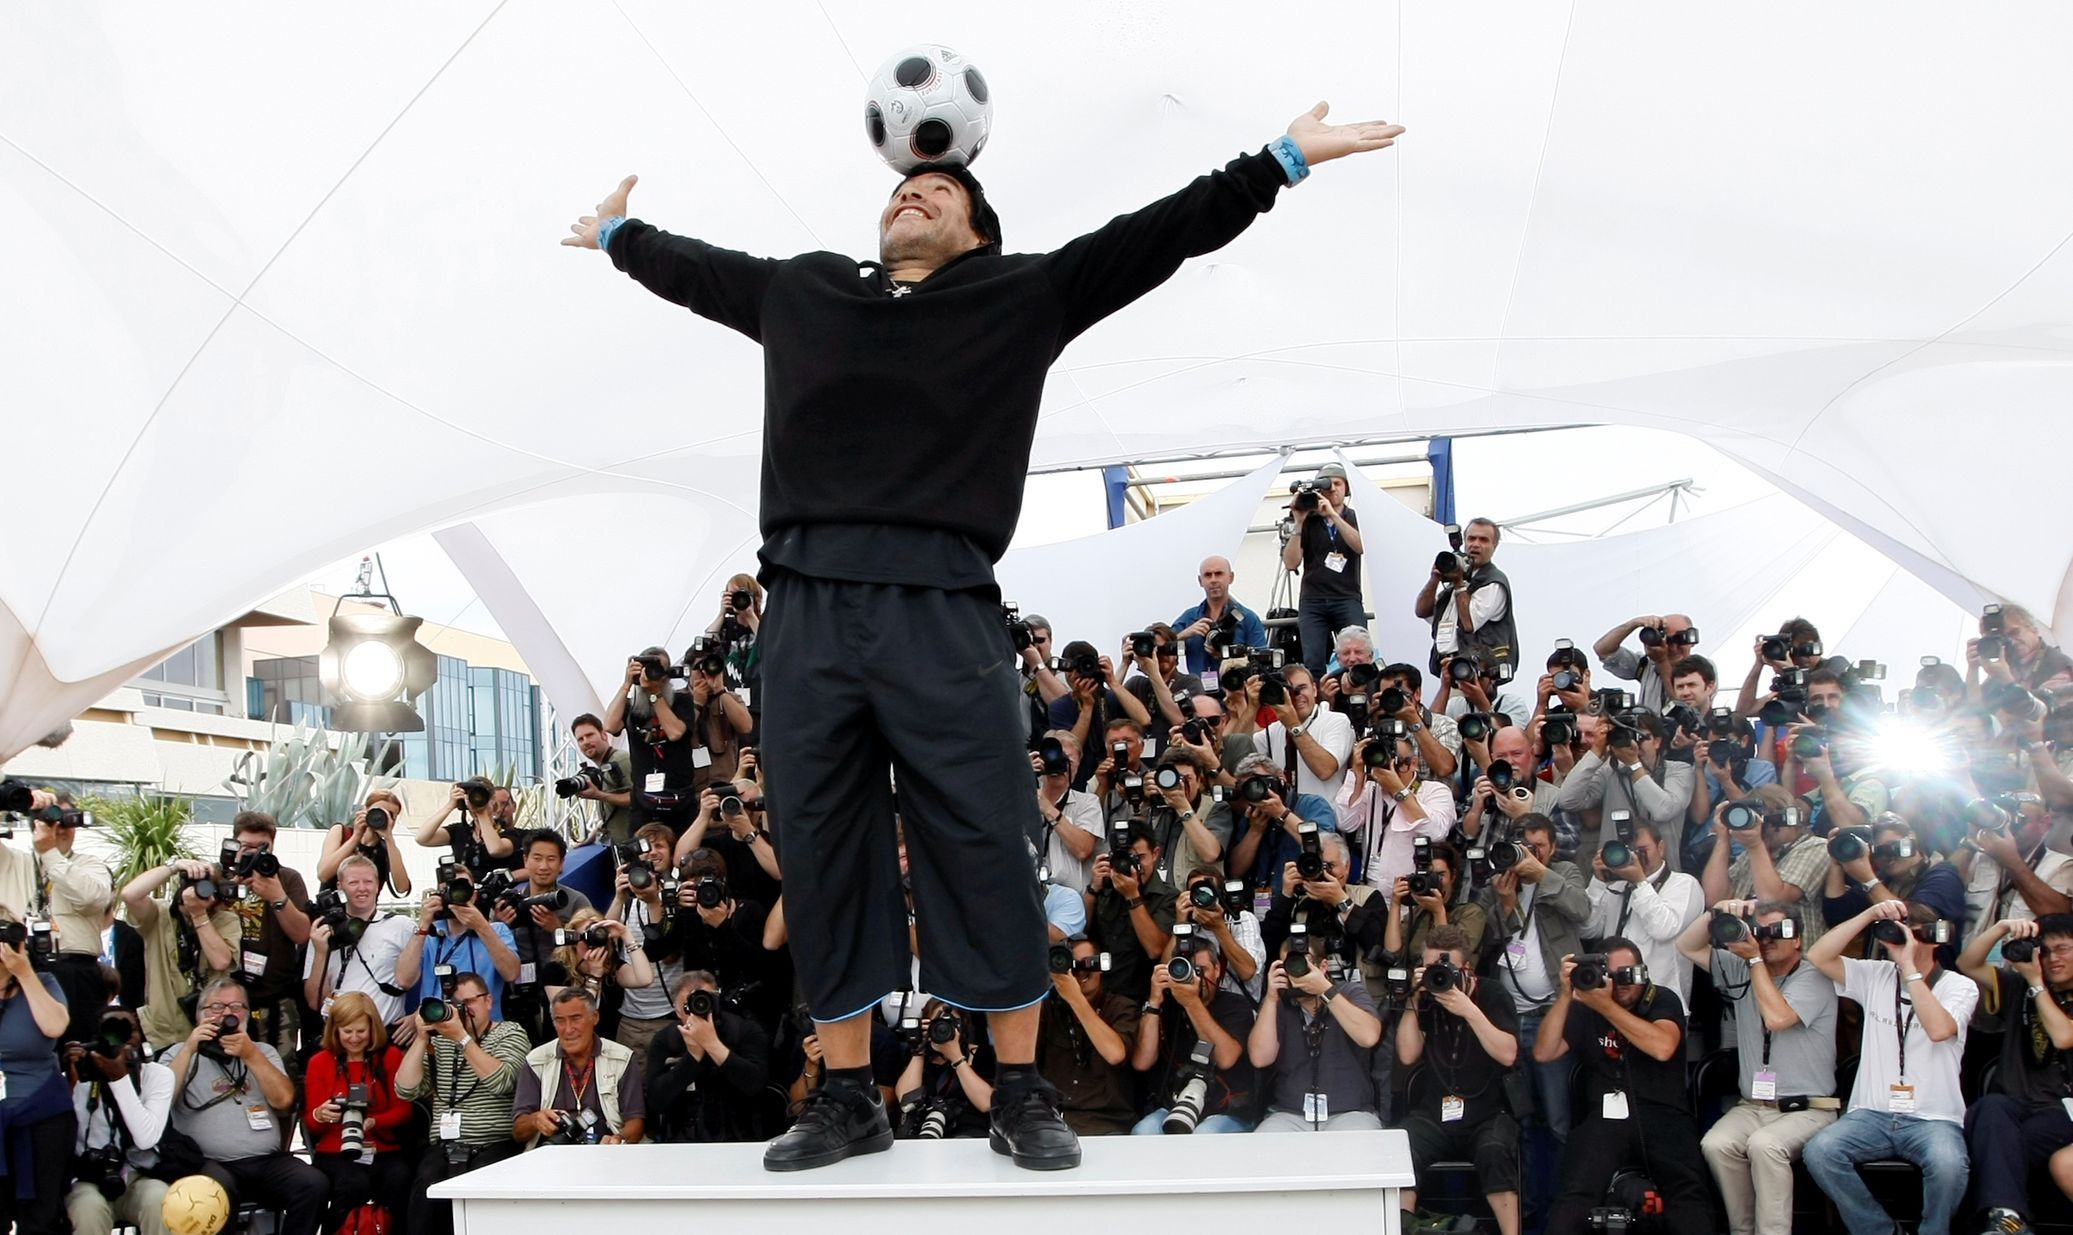 FILE PHOTO: Argentine great Diego Maradona balances a ball on his head during an event at the 61st Cannes Film Festival on the French Riviera